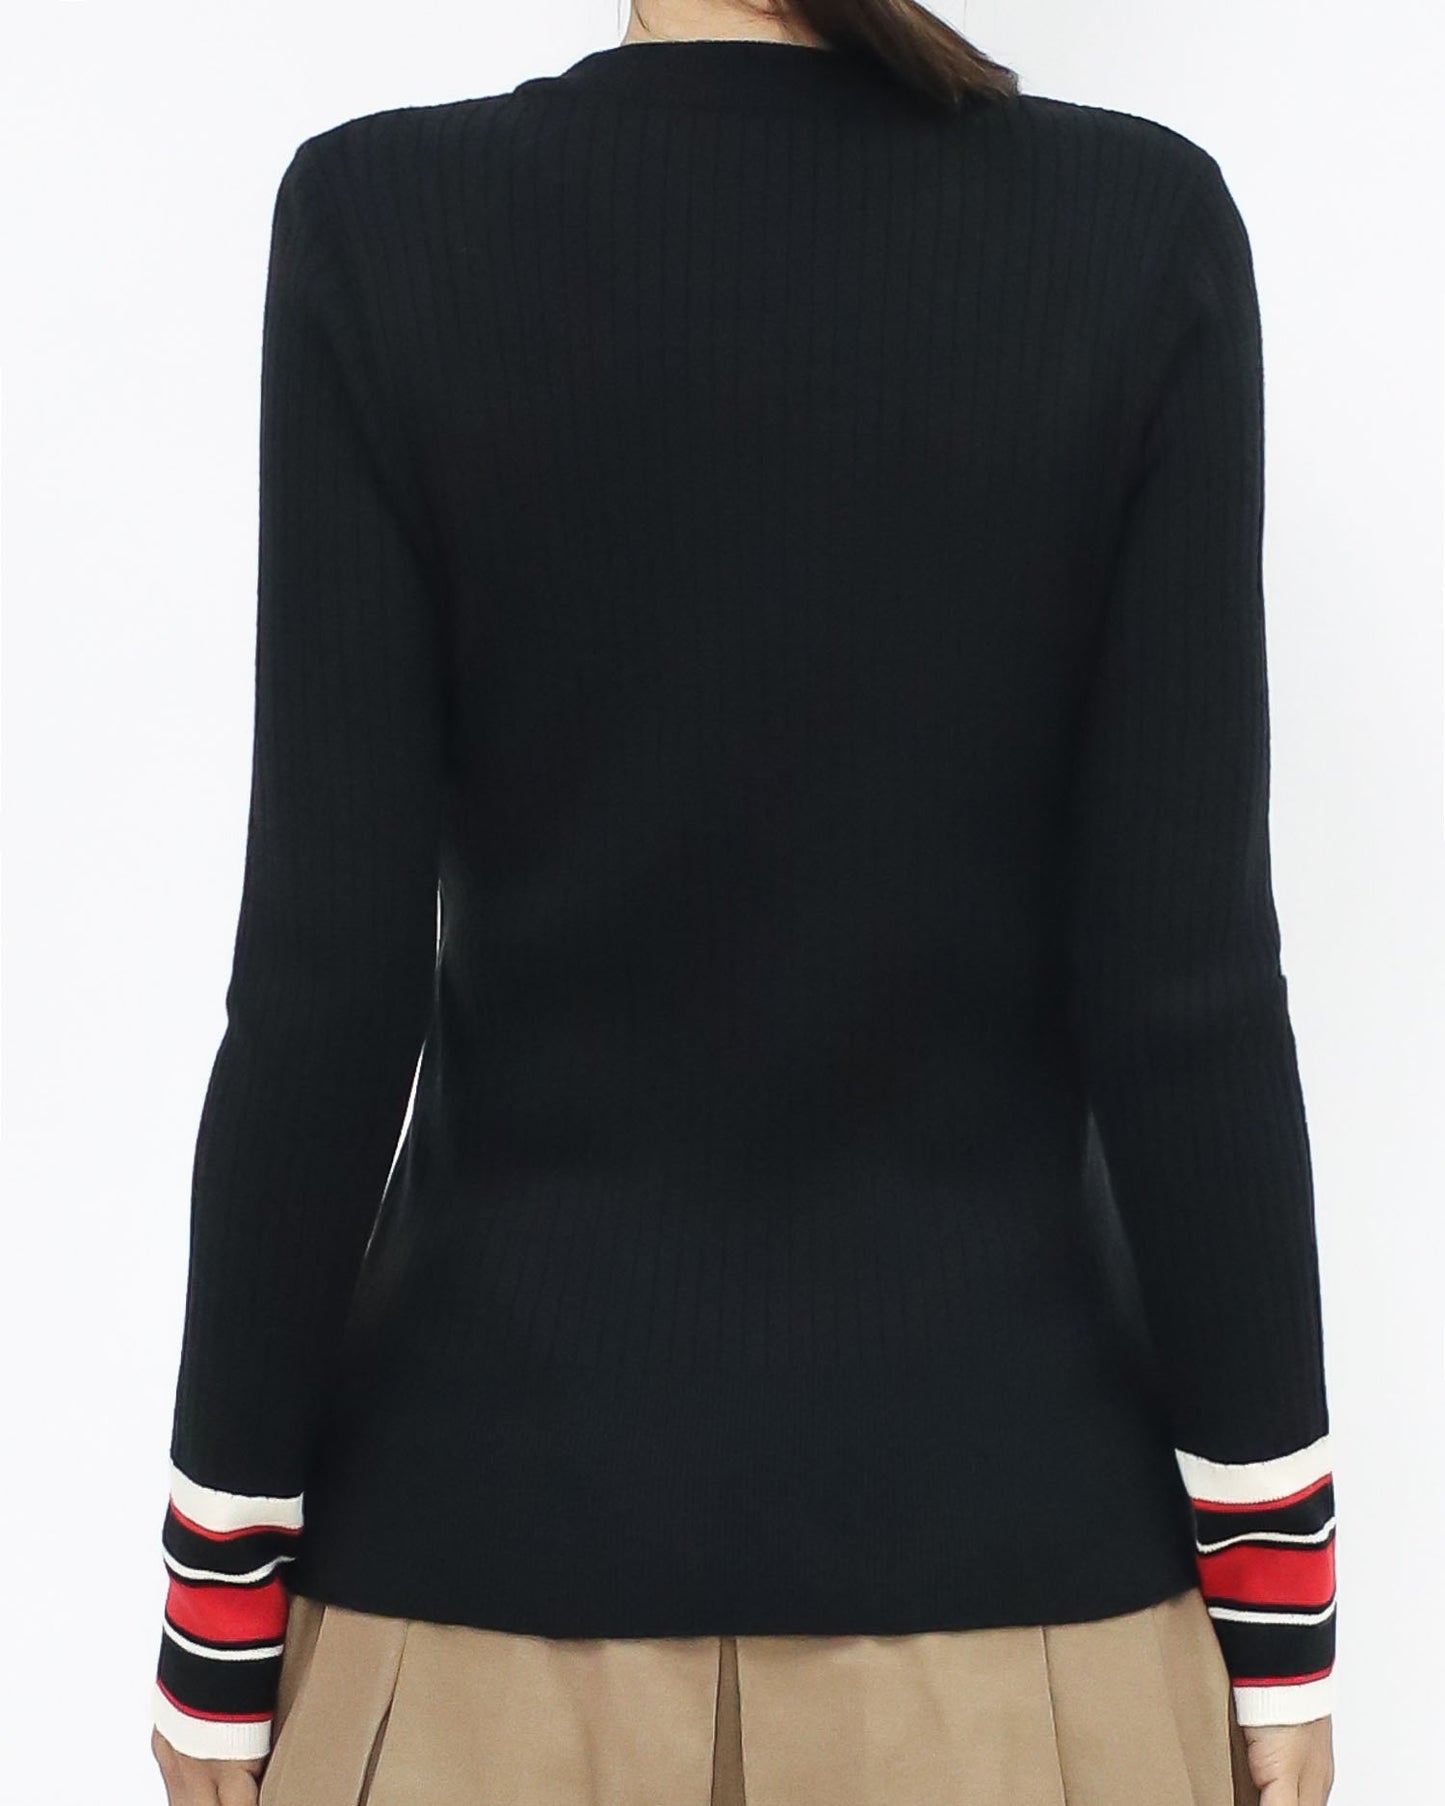 black w/ red & ivory stripes knitted top